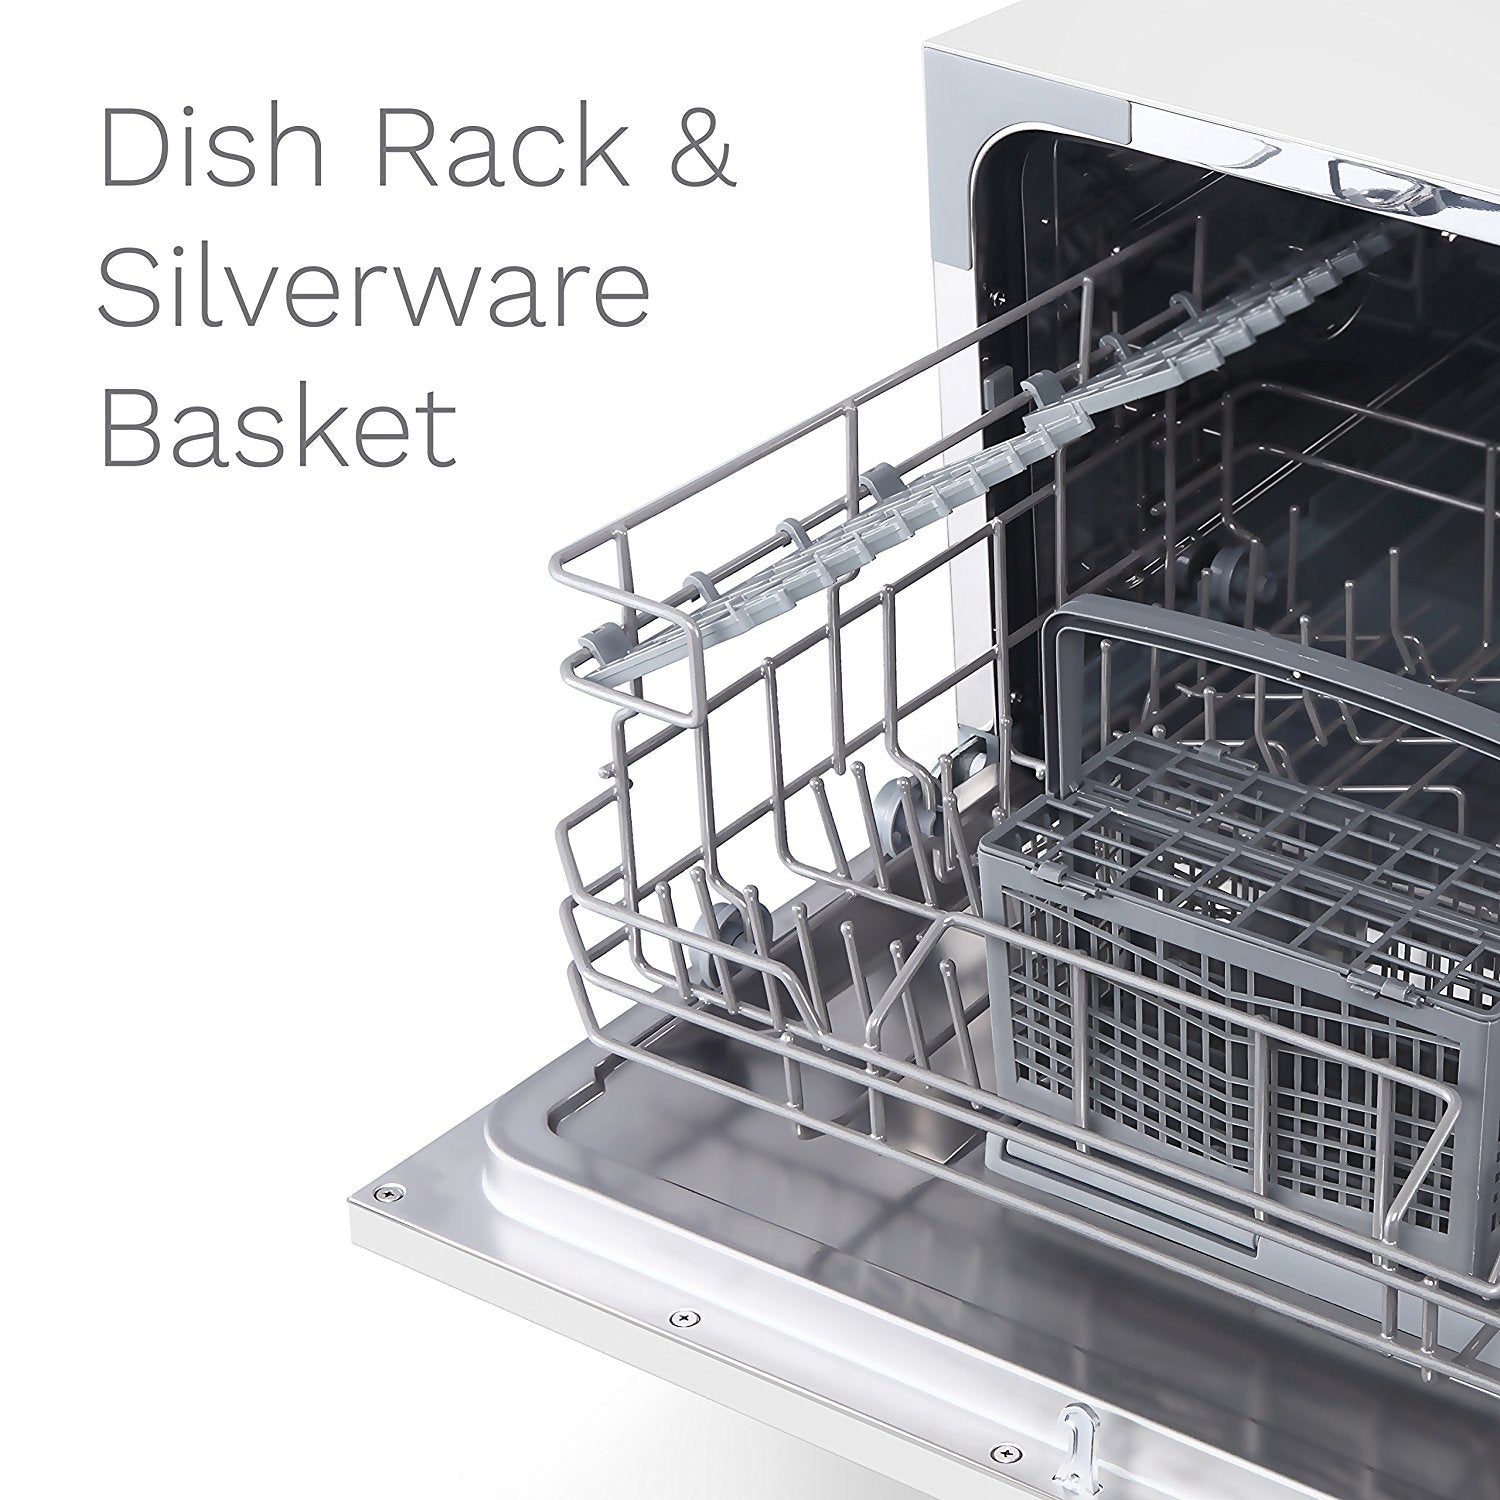 With dish rack and silverware basket